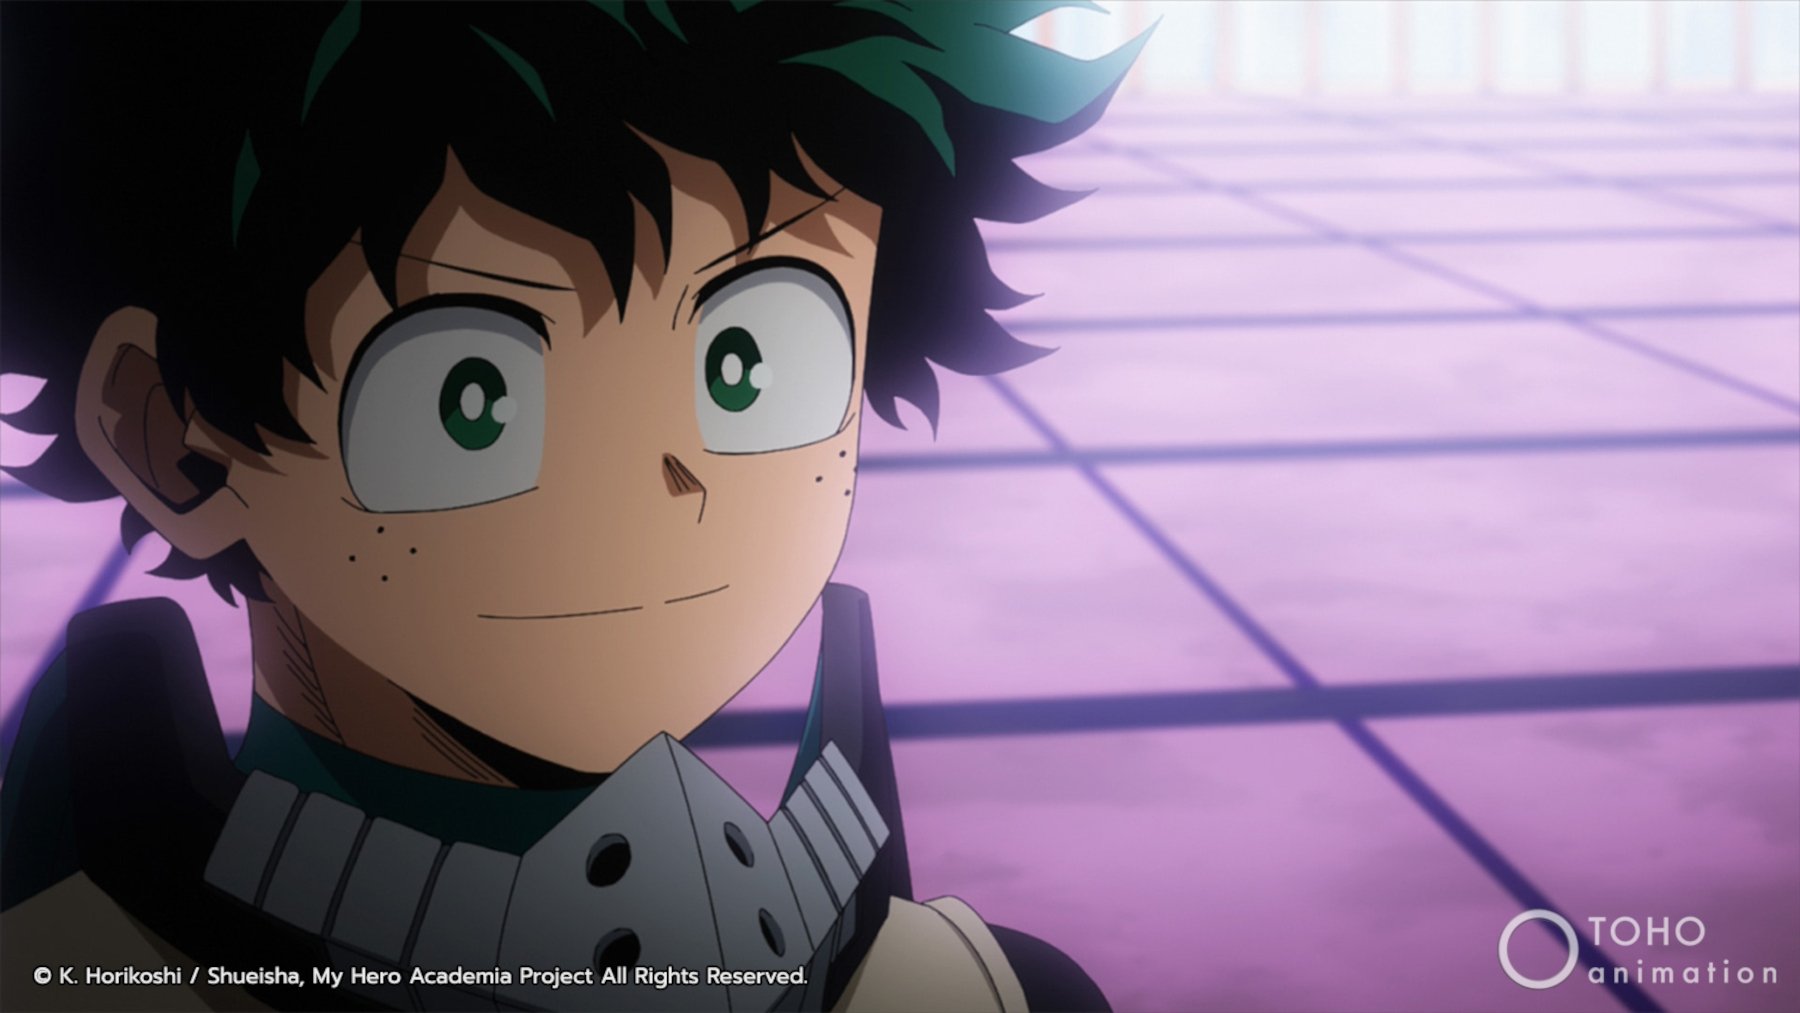 Deku in 'My Hero Academia,' which now has an official release date for season 6. He's smiling, and there are purple tiles behind him.